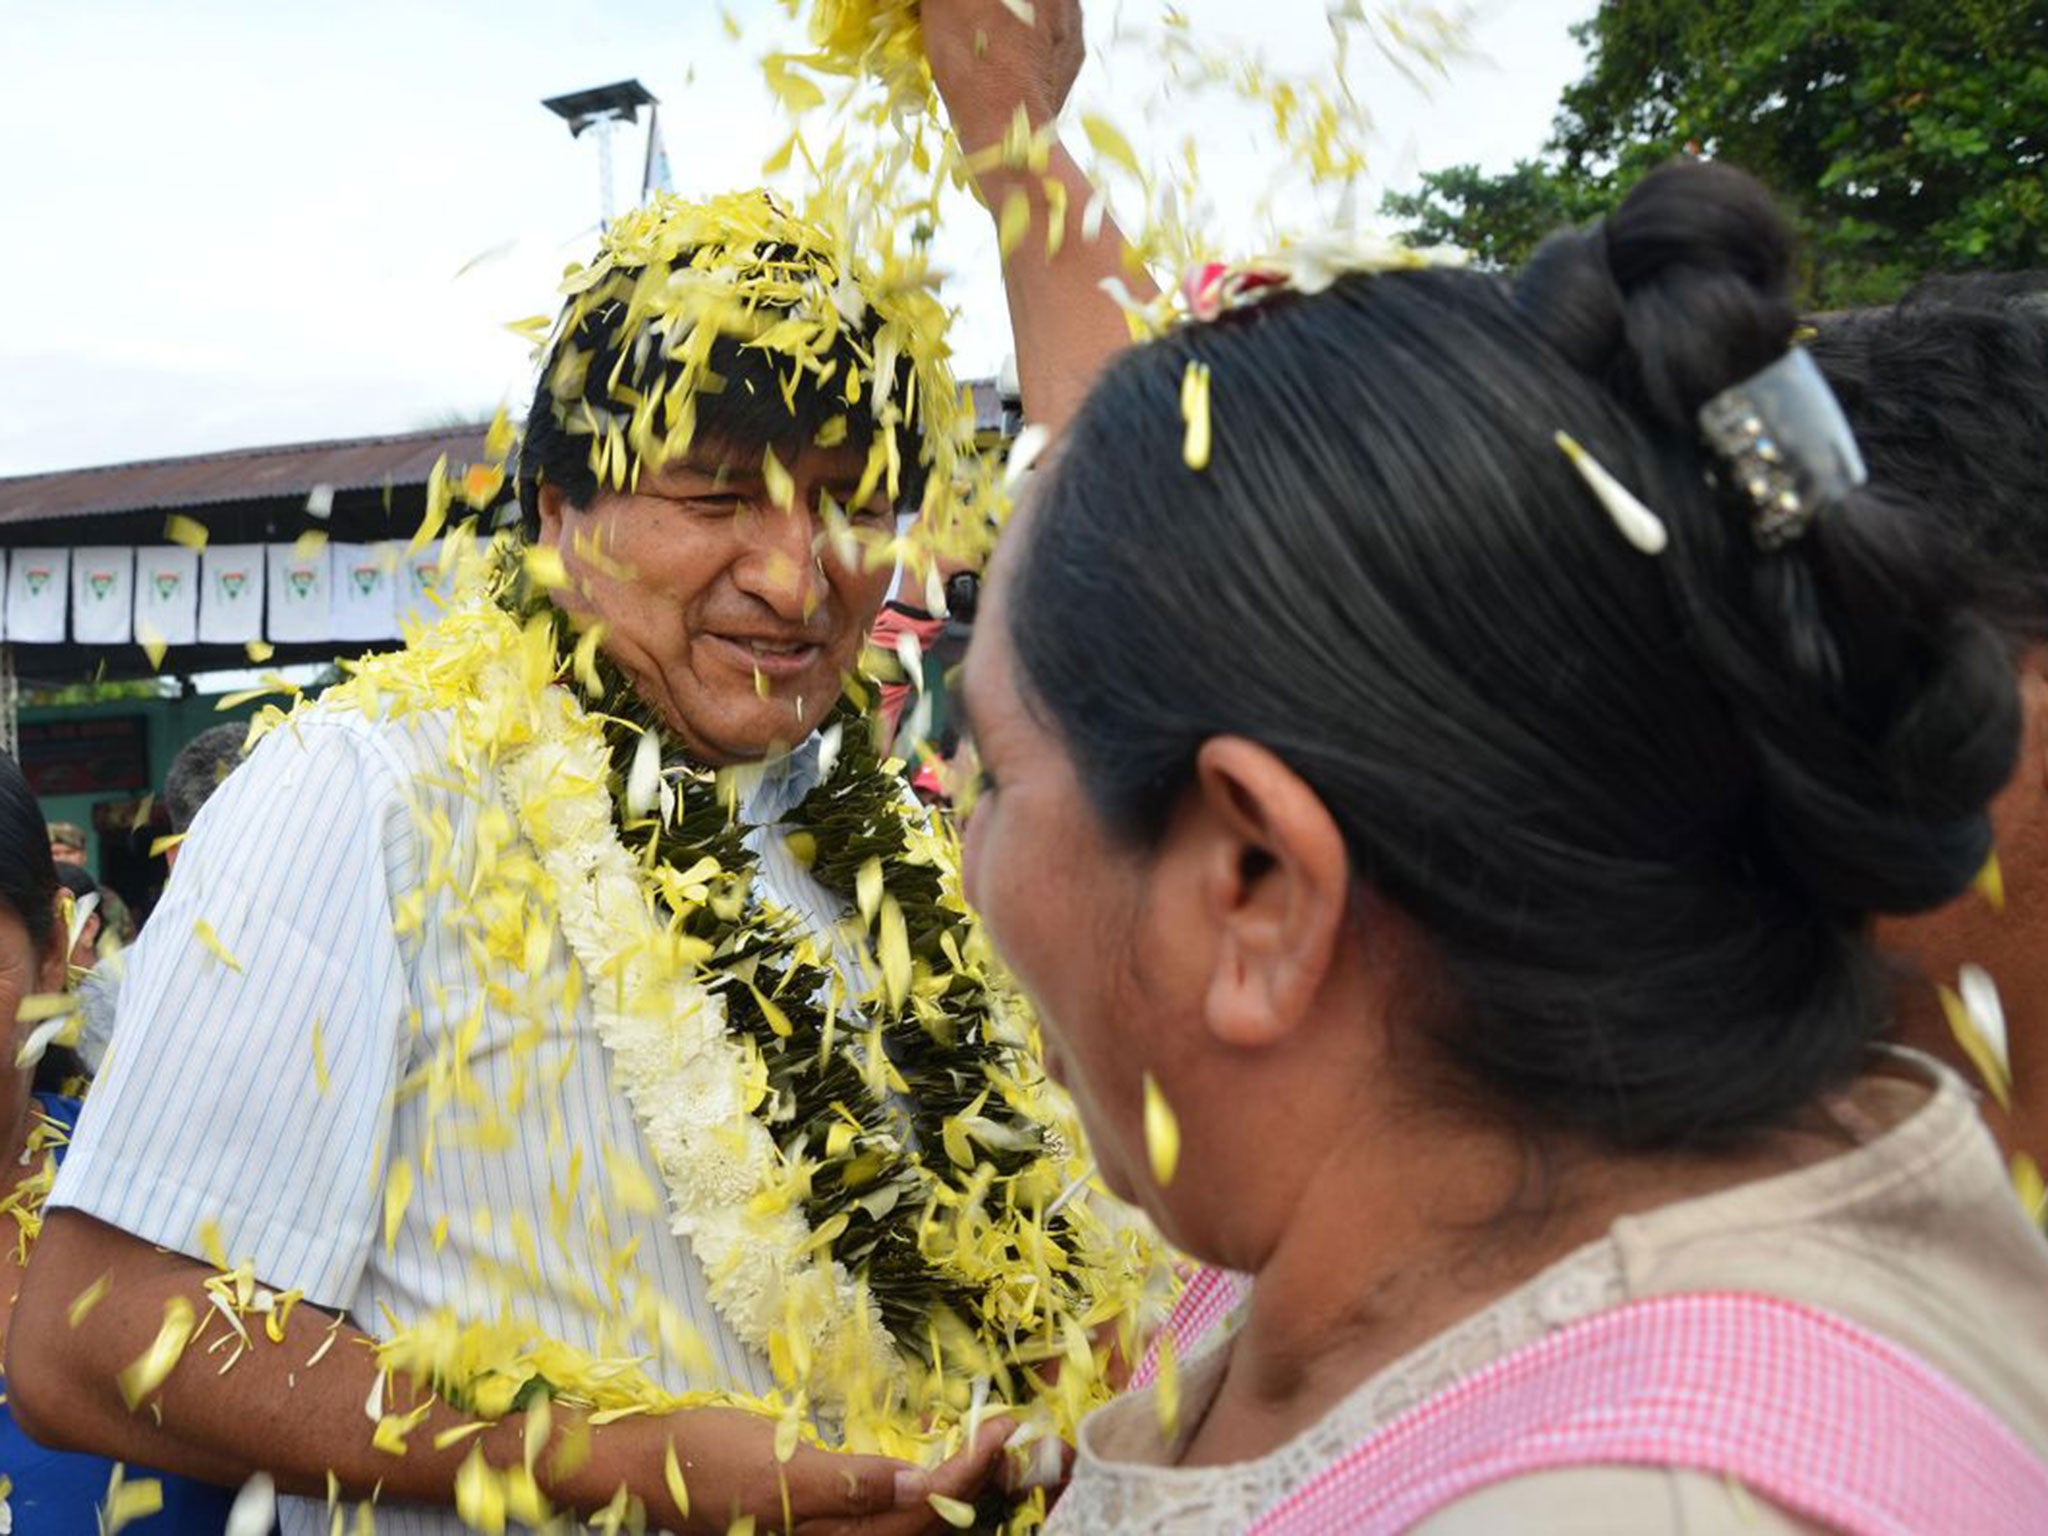 A coca farmer welcomes Evo Morales as he arrives at a polling station in Chapare on Sunday